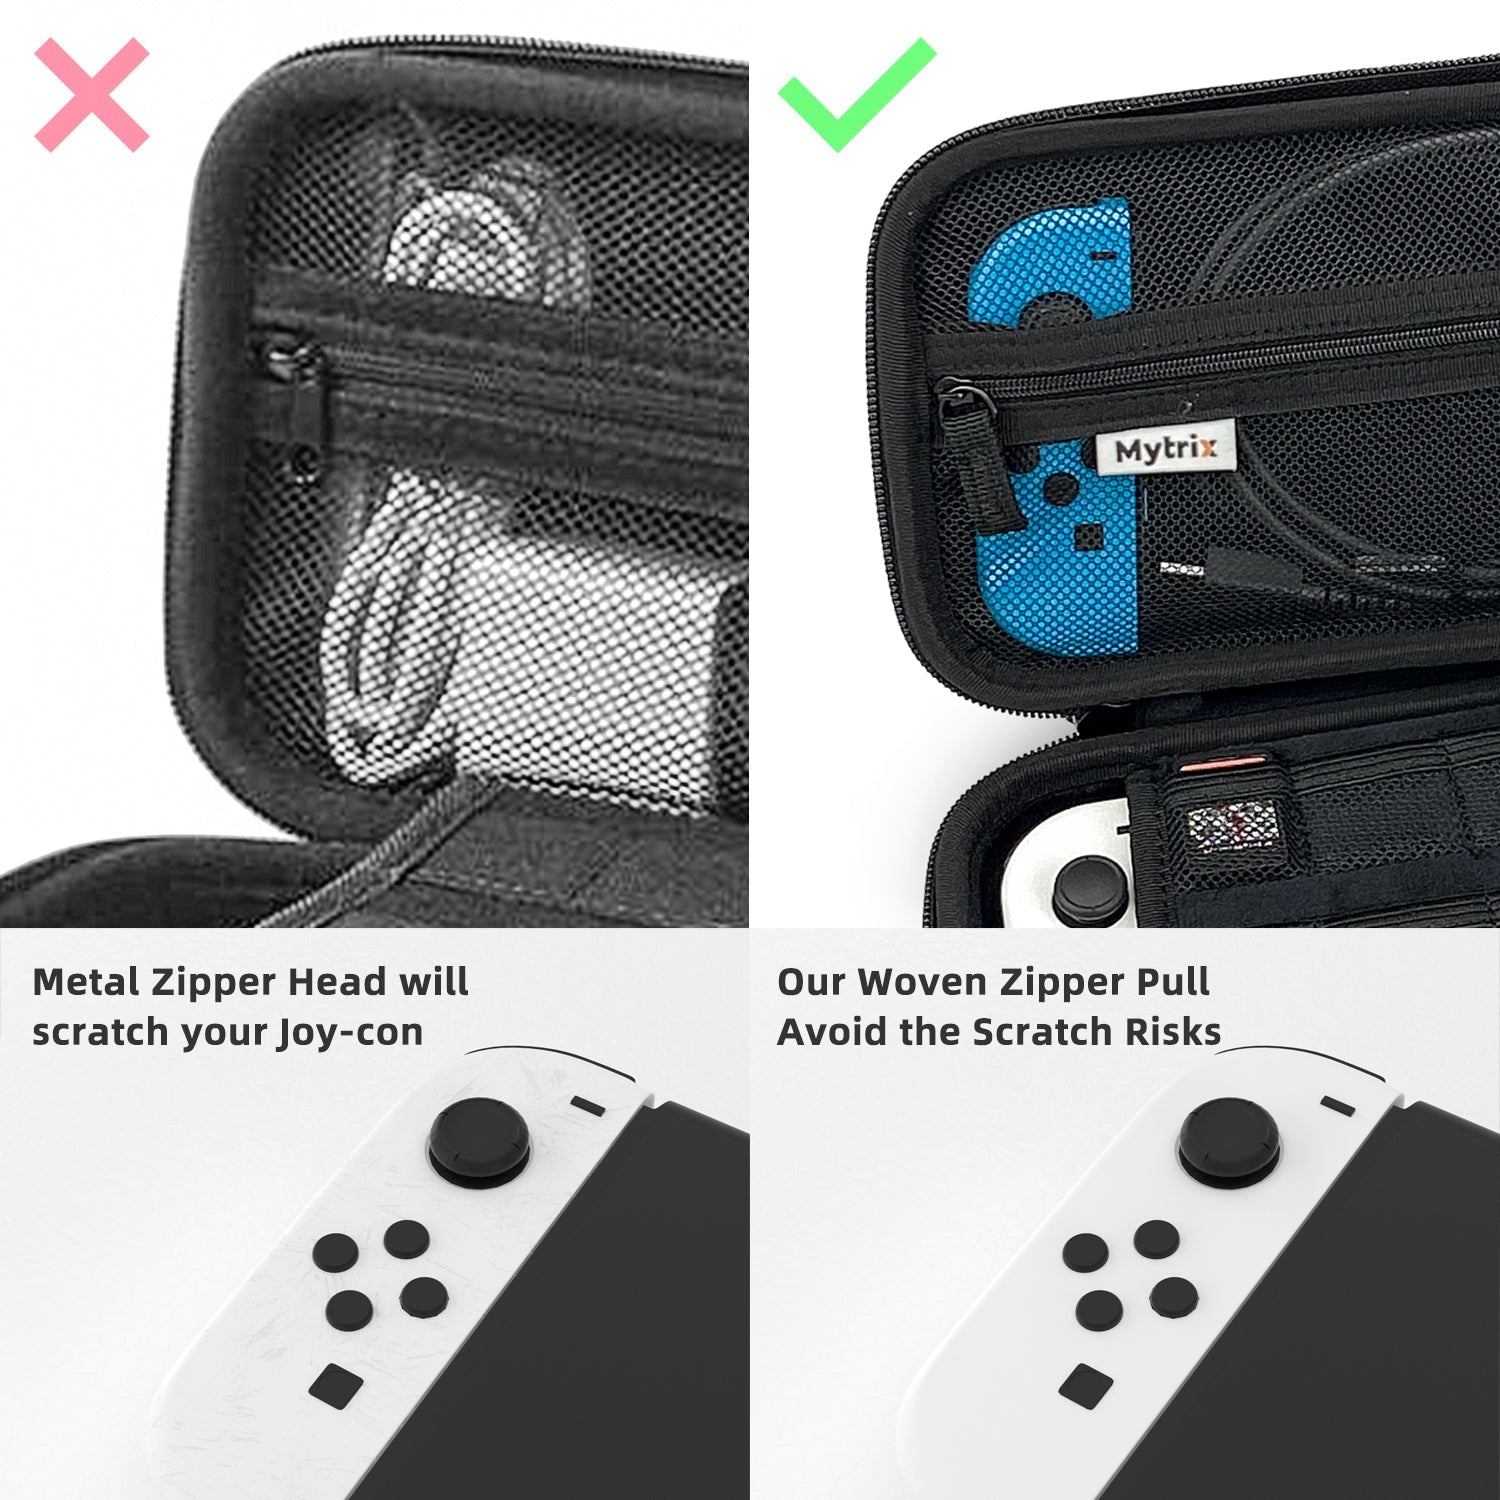 Mytrix Switch Carrying Case for Nintendo Switch & Newest Switch OLED, Japanese Samurai Protective Travel Storage Bag with Pocket & 10 Game Card Slots